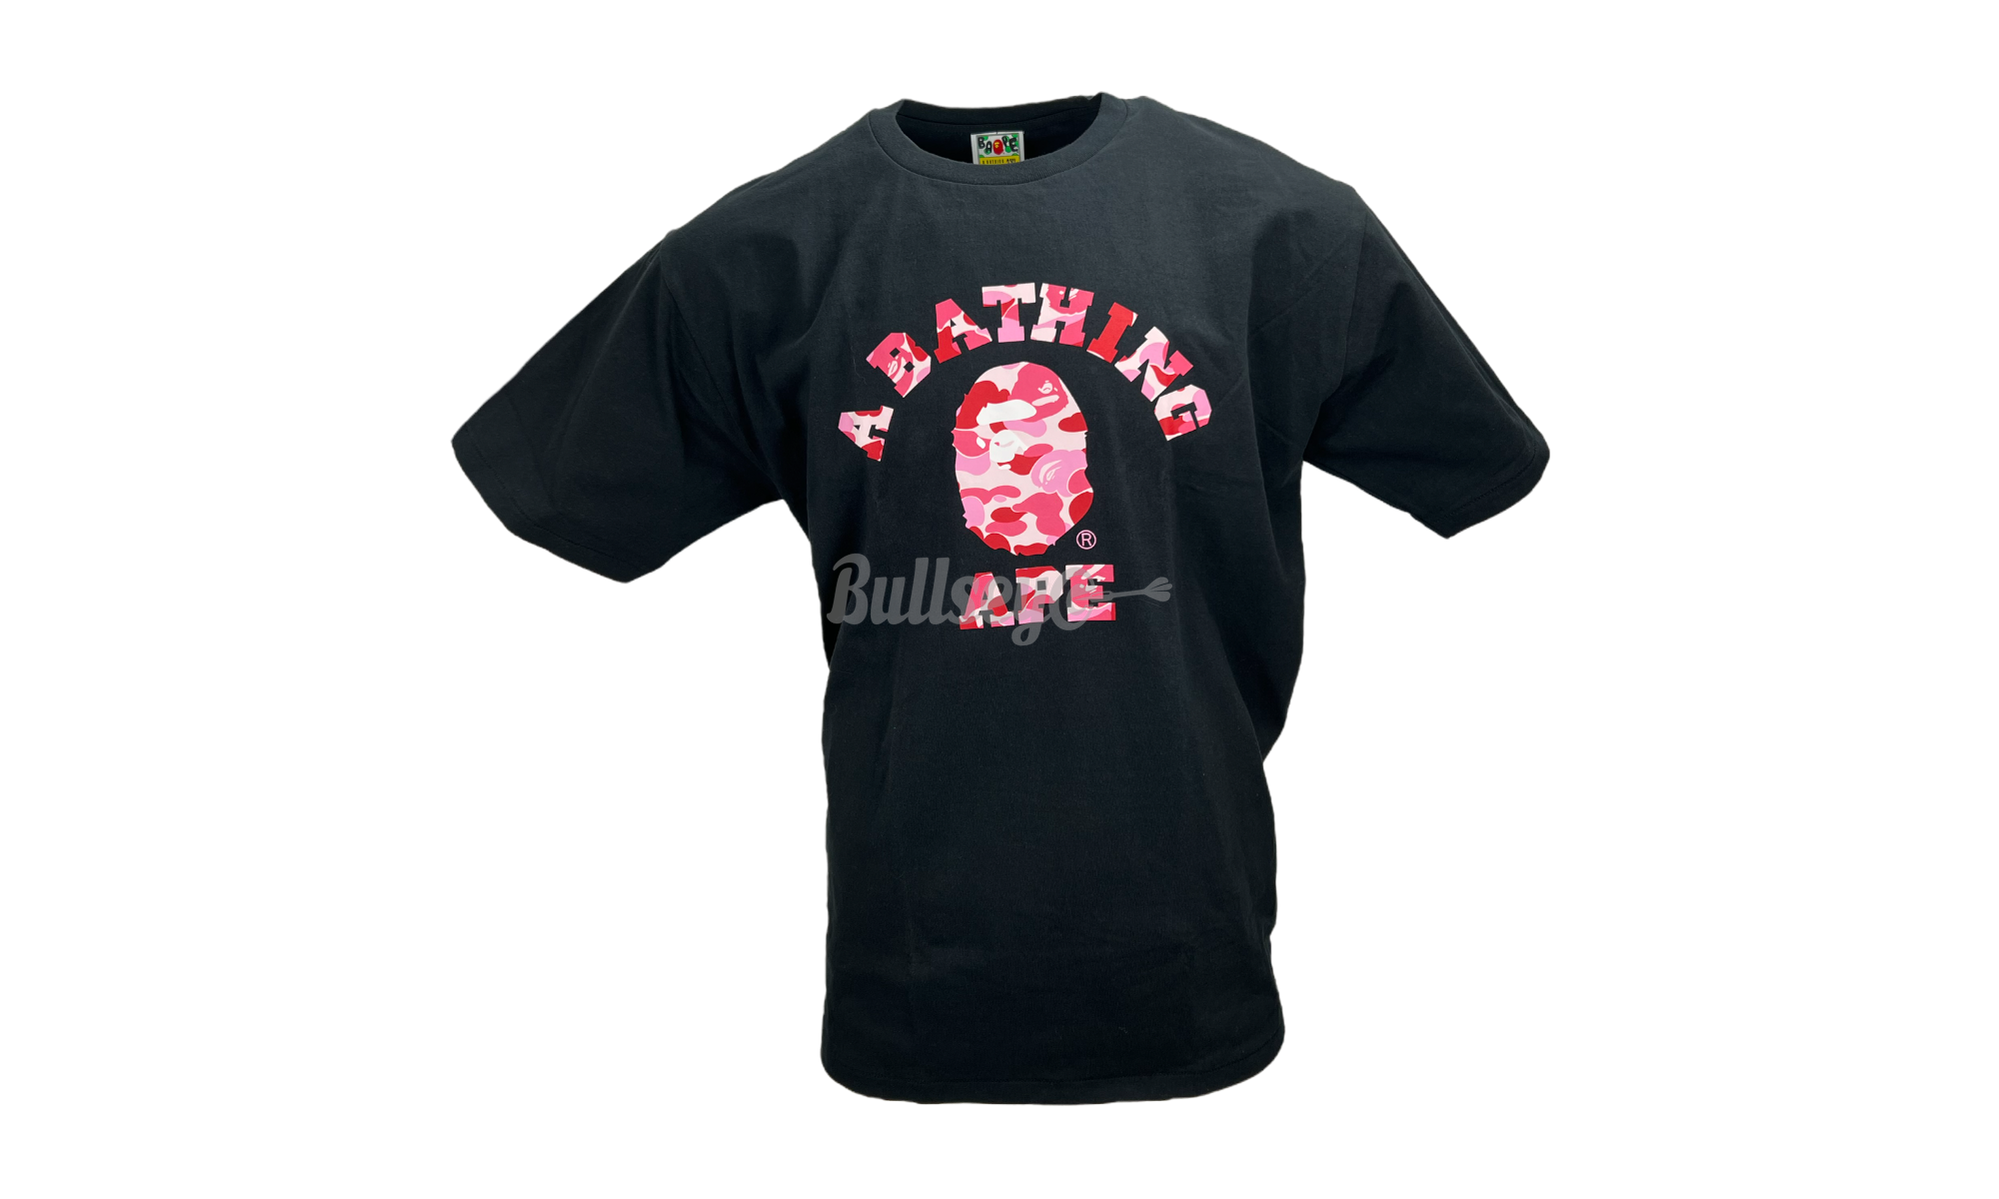 Bape ABC Black/Pink Camo College T - Shirt - might not have been